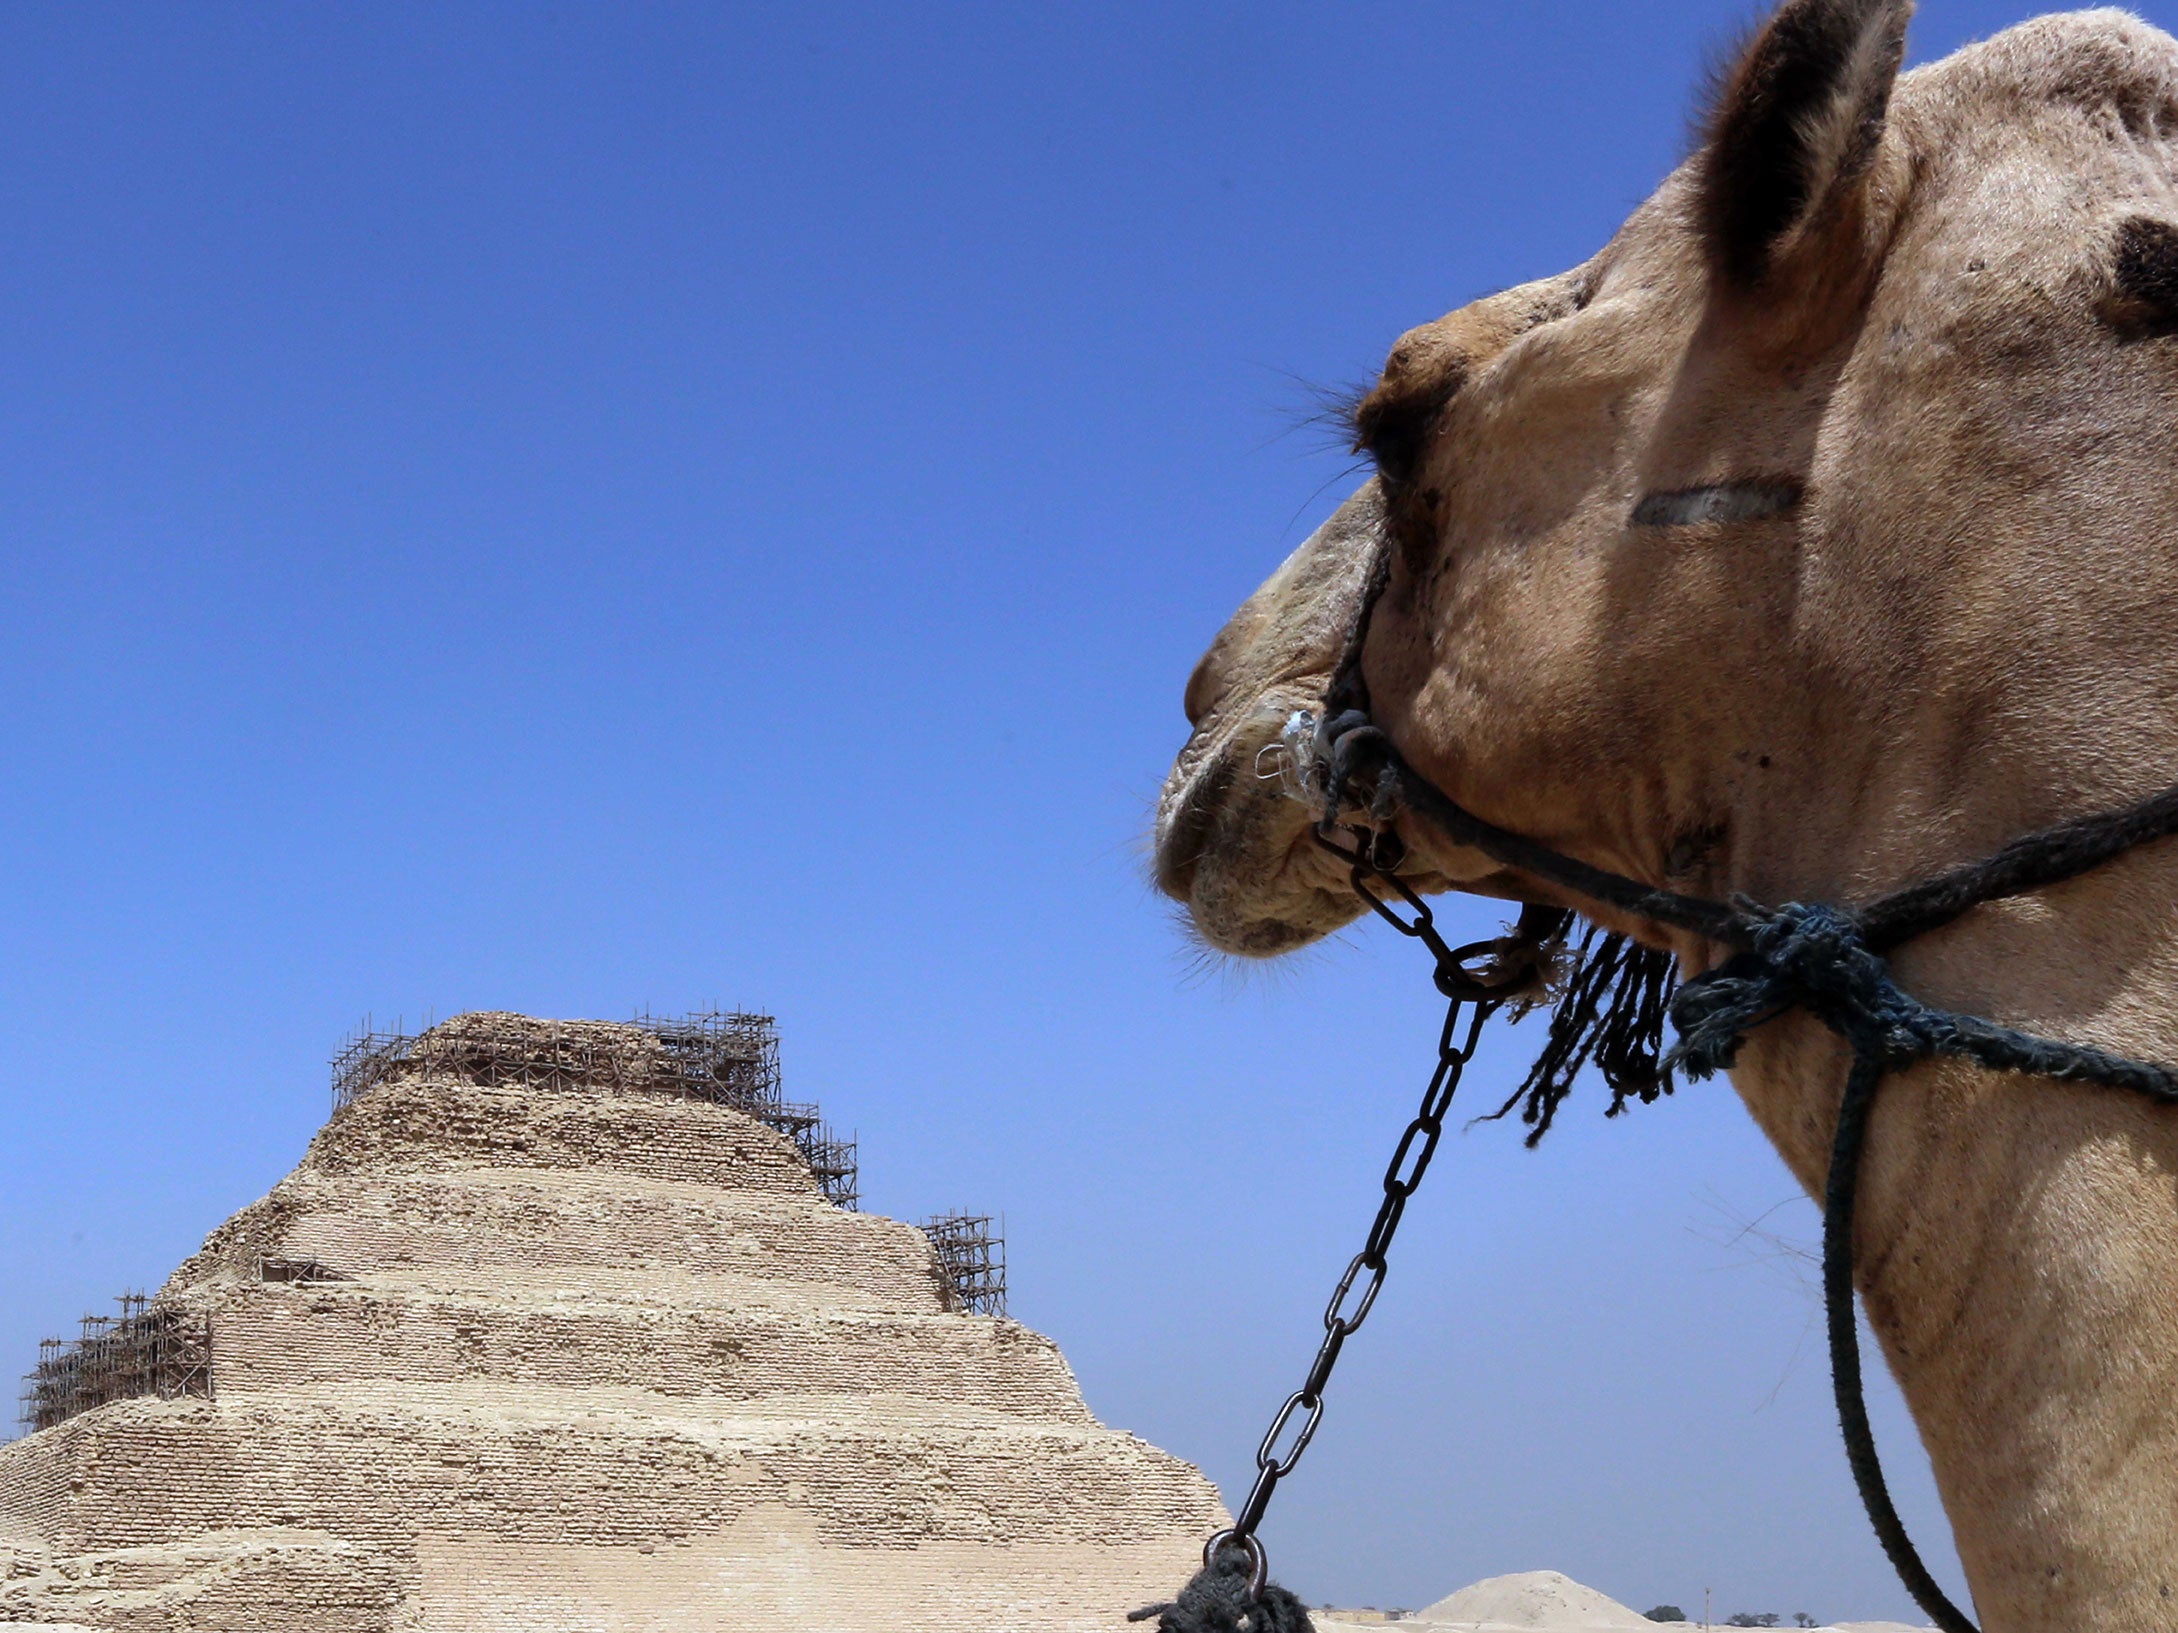 Should they take over Egypt, ISIS militants 'would demand the dynamiting of the Pyramids'